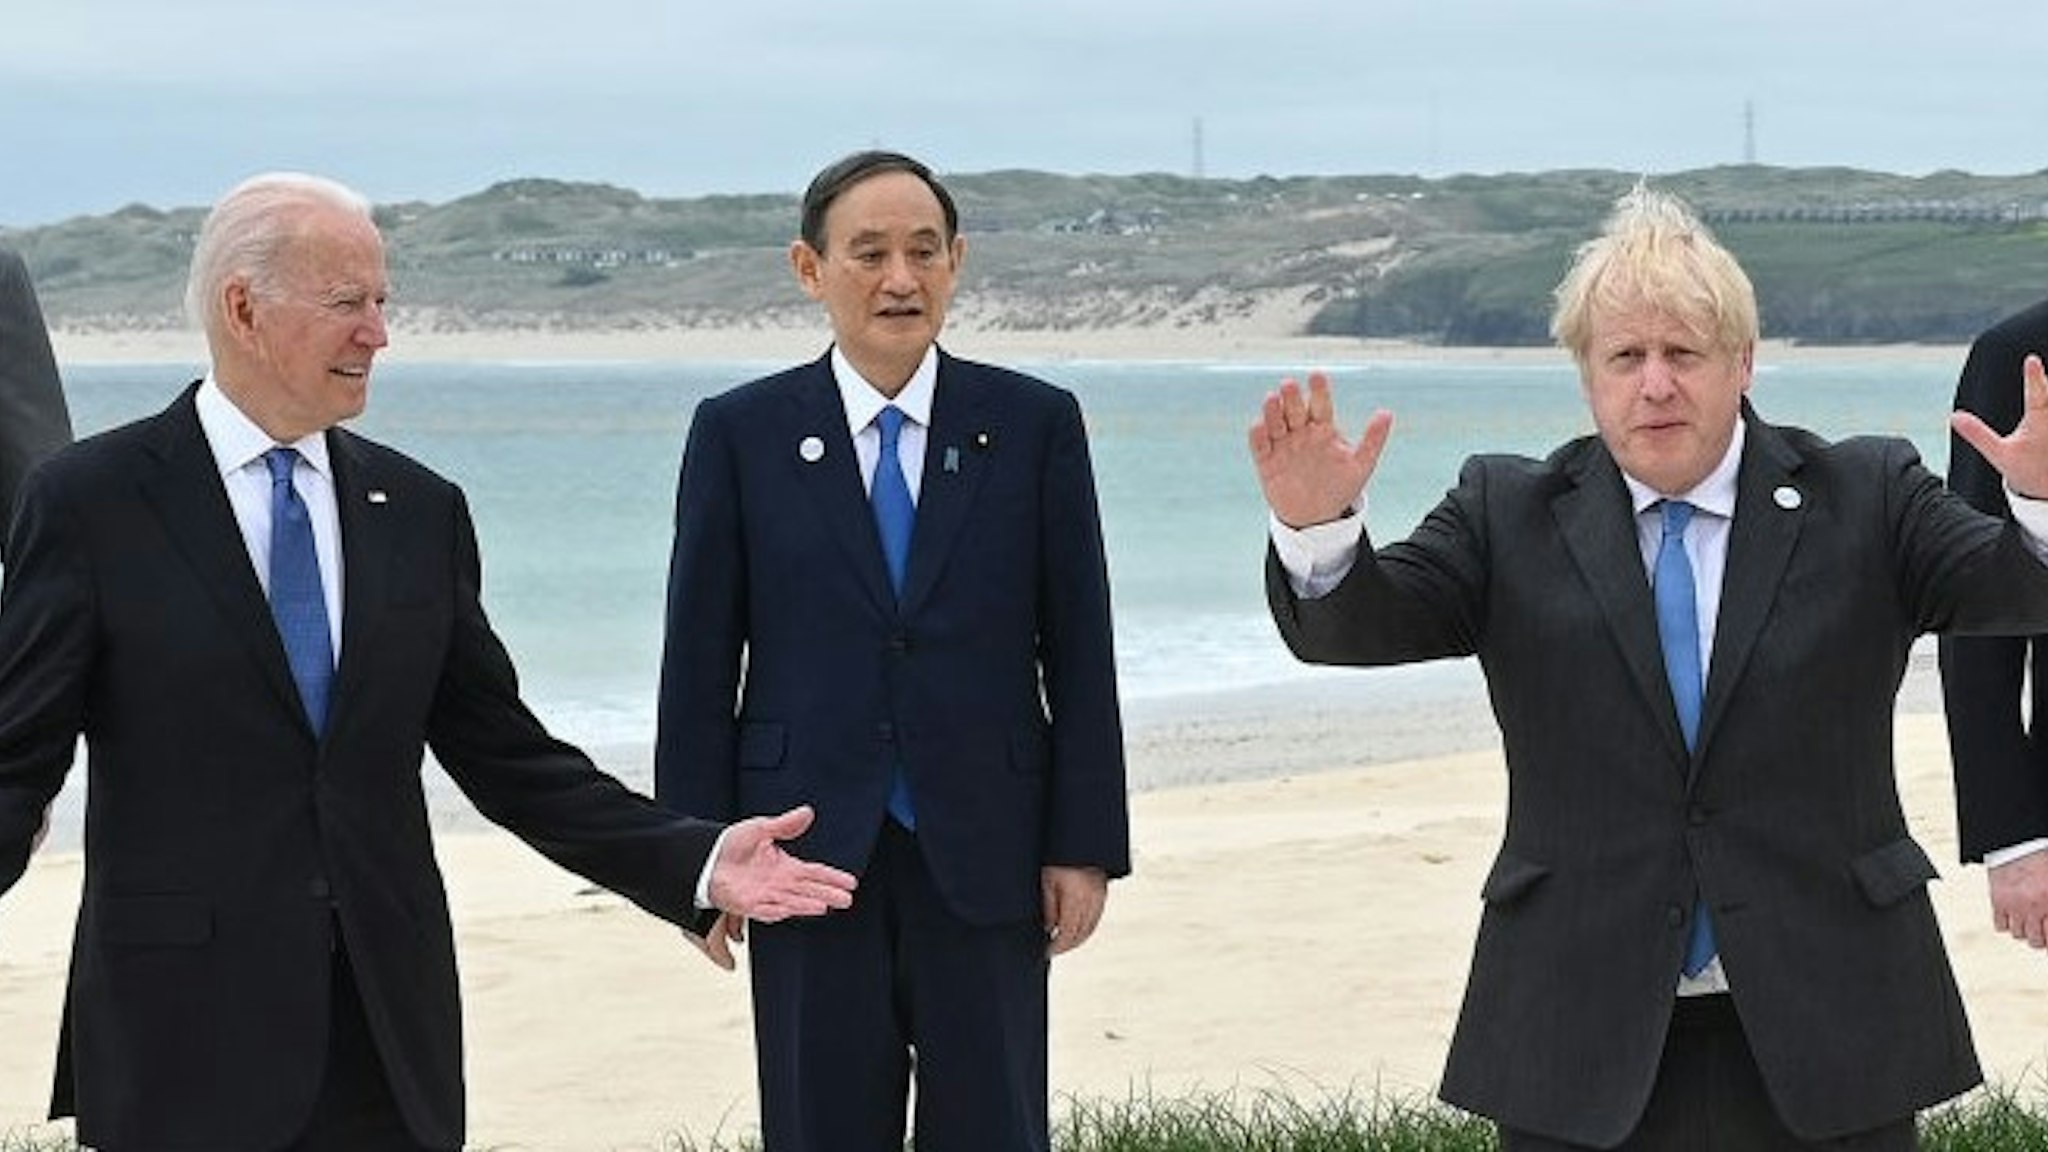 CARBIS BAY, CORNWALL - JUNE 11: (Alternate crop of #1233390711) (L-R) President of the European Council Charles Michel, US President Joe Biden, Japanese Prime Minister Yoshihide Suga, British Prime Minister Boris Johnson and Italian Prime Minister Mario Draghi pose for the Leaders official welcome and family photo during the G7 Summit In Carbis Bay, on June 11, 2021 in Carbis Bay, Cornwall. UK Prime Minister, Boris Johnson, hosts leaders from the USA, Japan, Germany, France, Italy and Canada at the G7 Summit. This year the UK has invited India, South Africa, and South Korea to attend the Leaders' Summit as guest countries as well as the EU. (Photo by